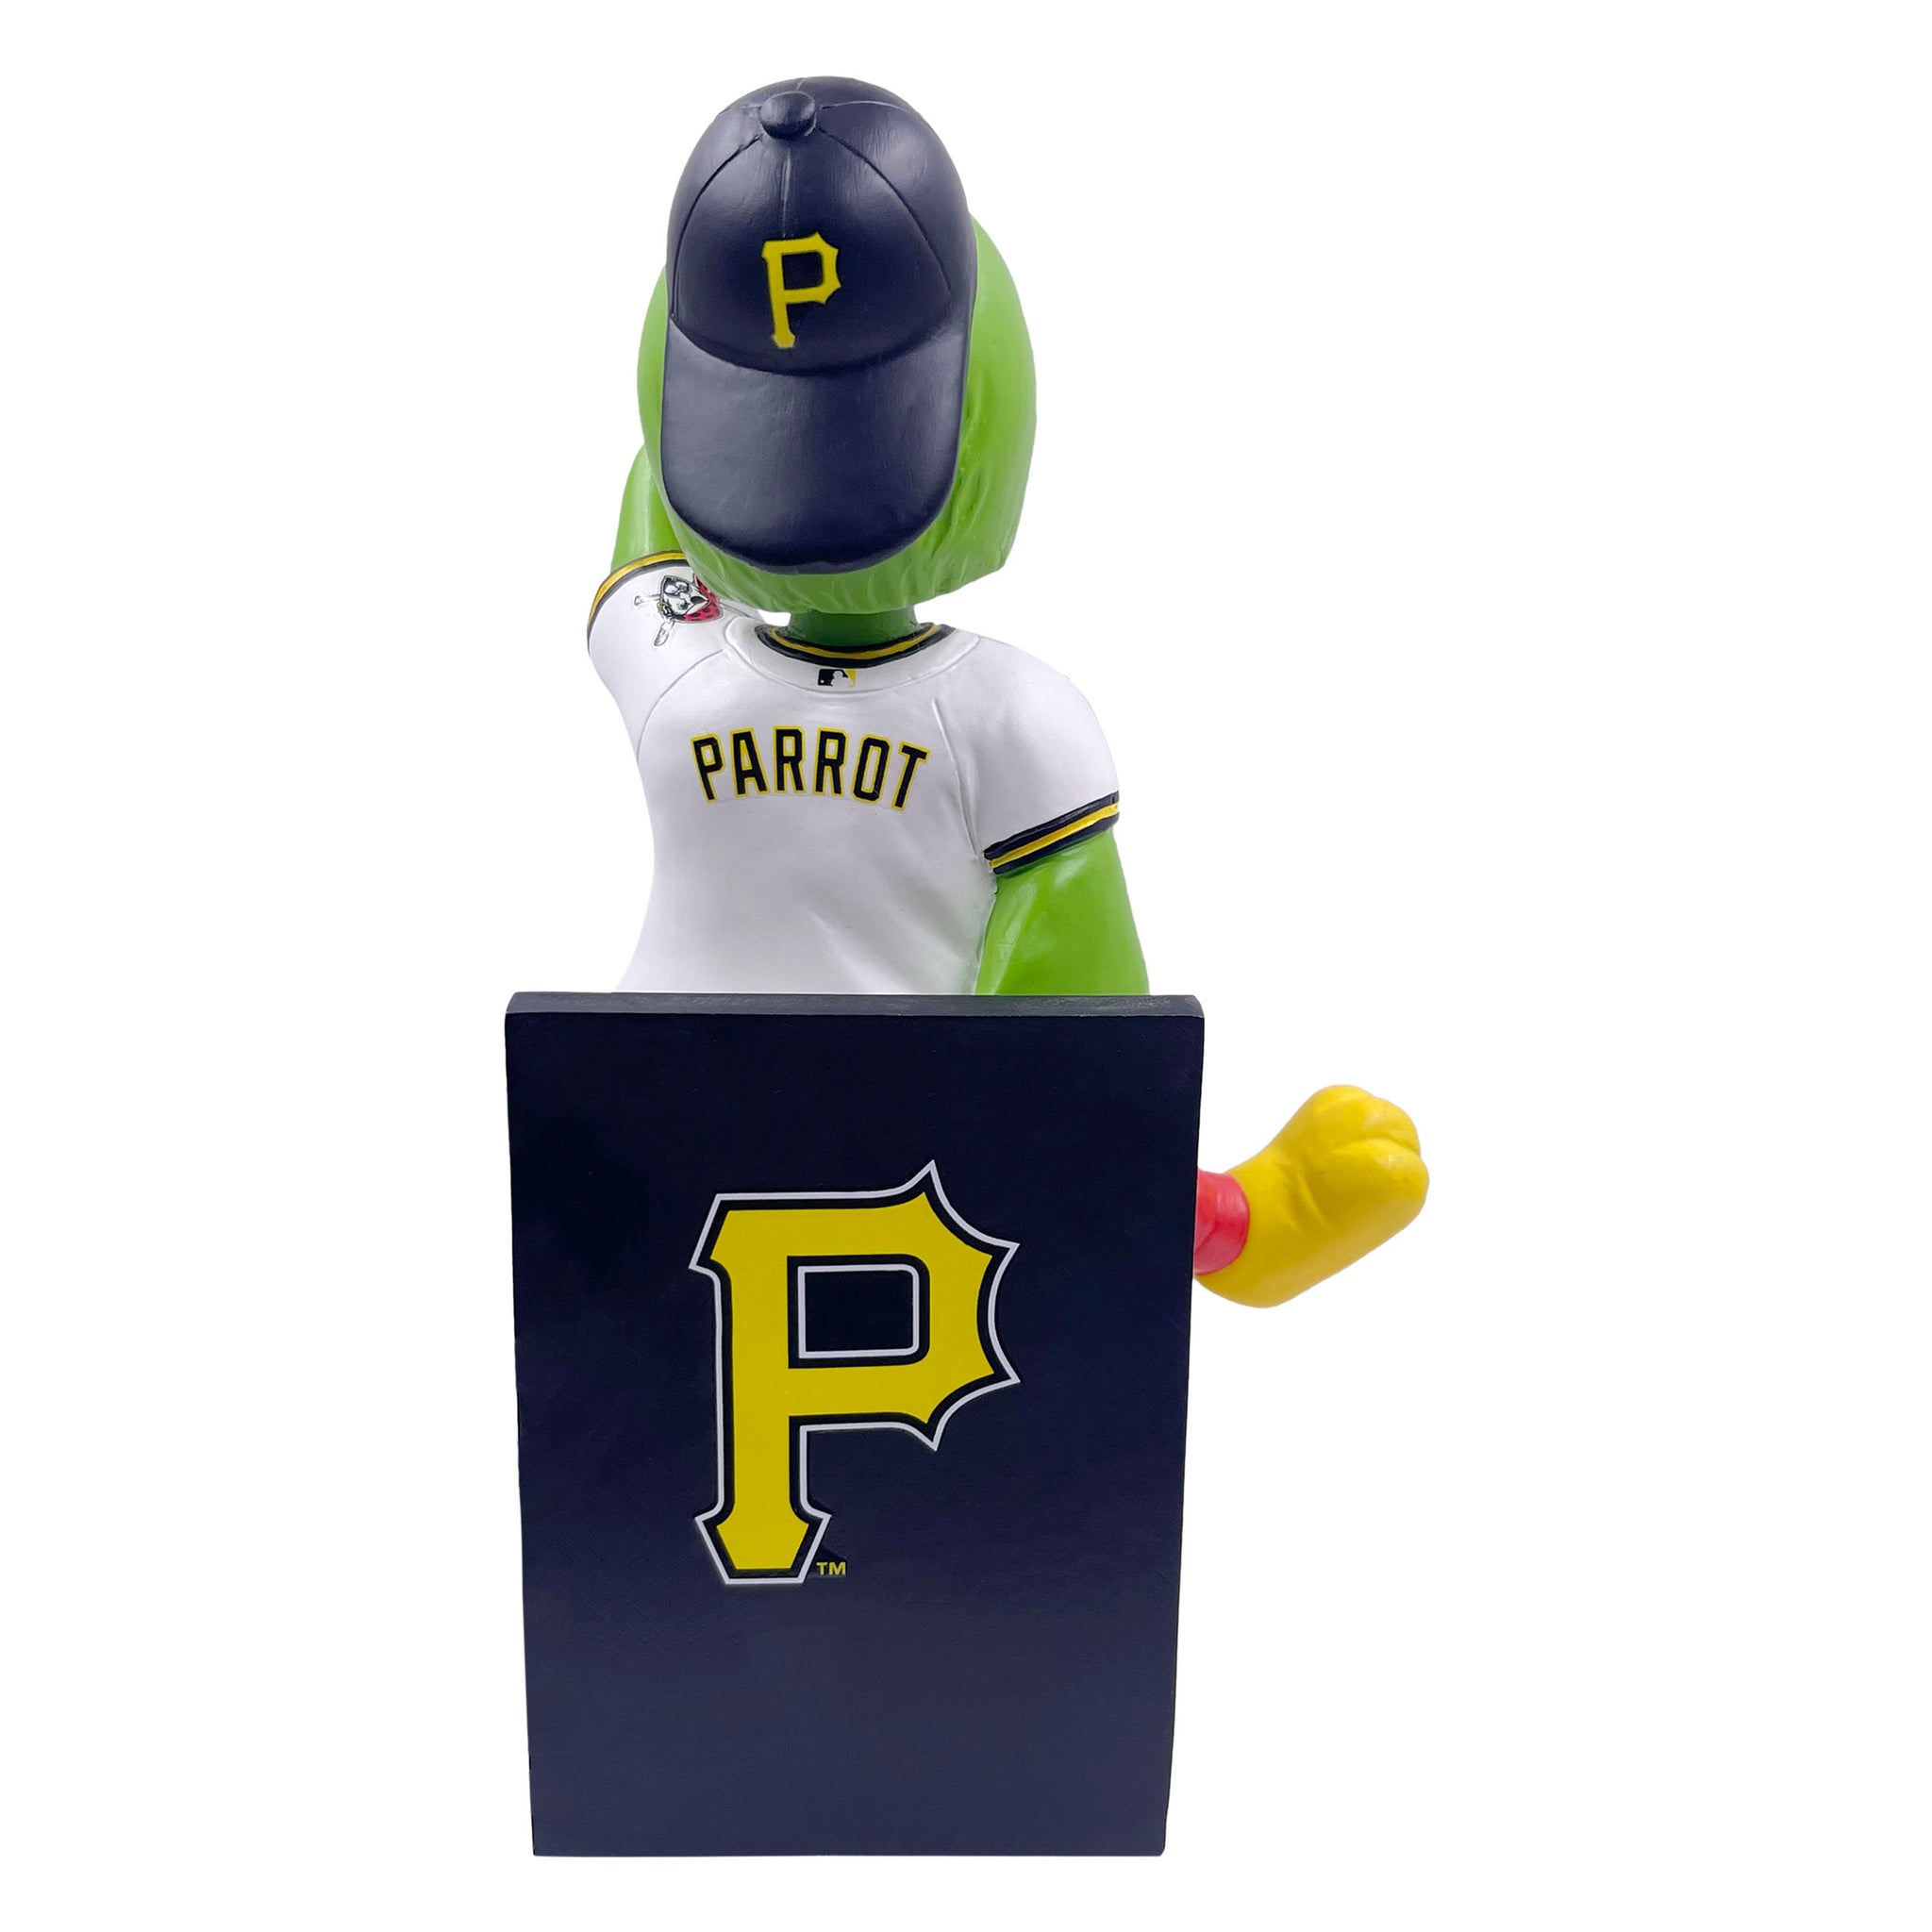 THE PIRATE PARROT PITTSBURGH PIRATES OPENING DAY MASCOT BOBBLEHEAD